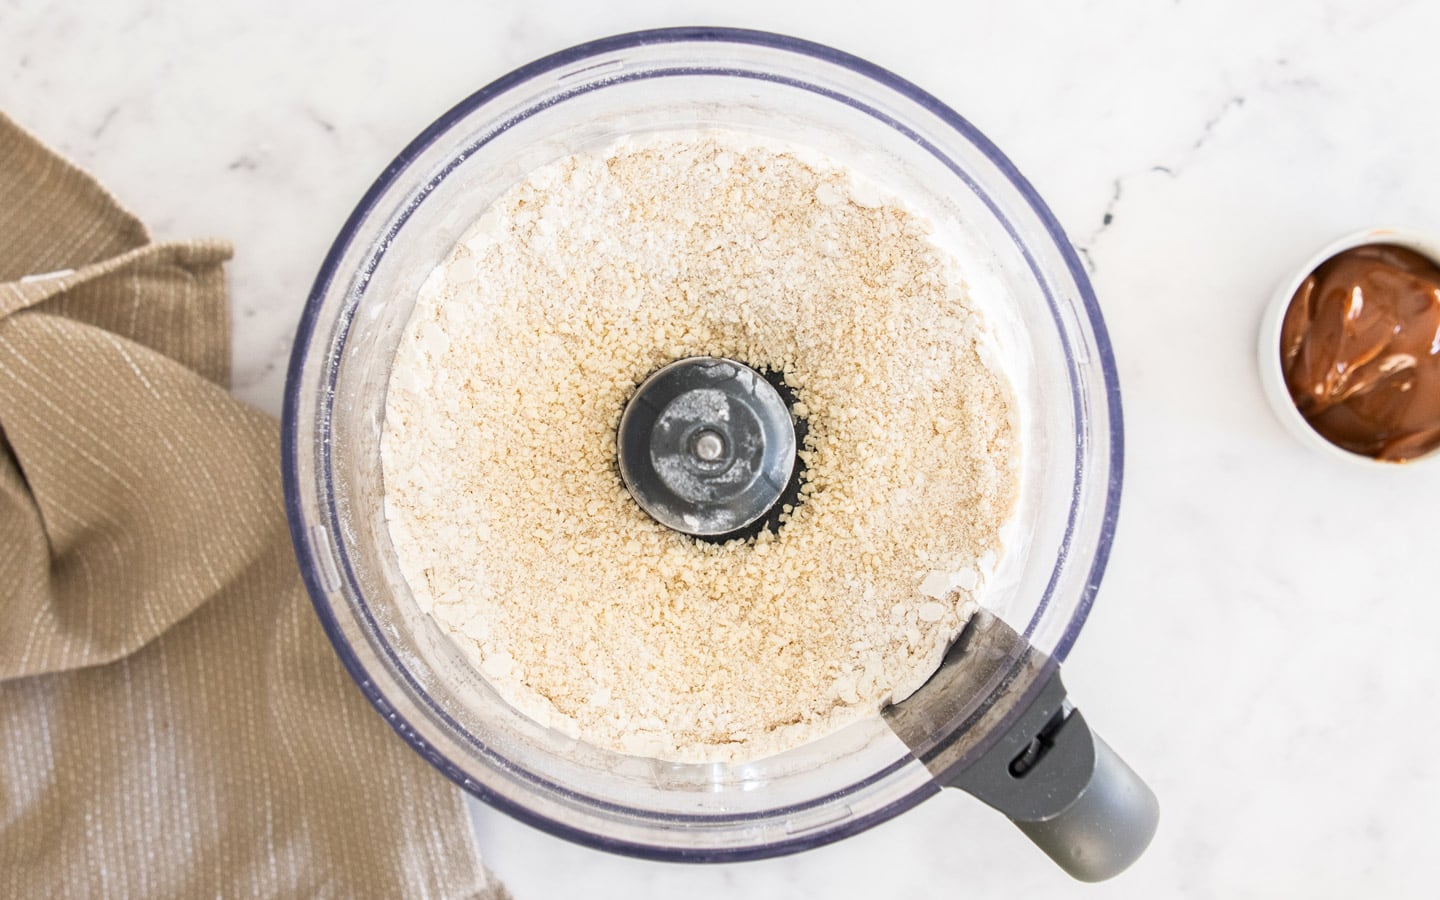 The pastry mixture in the food processor after the egg is added.